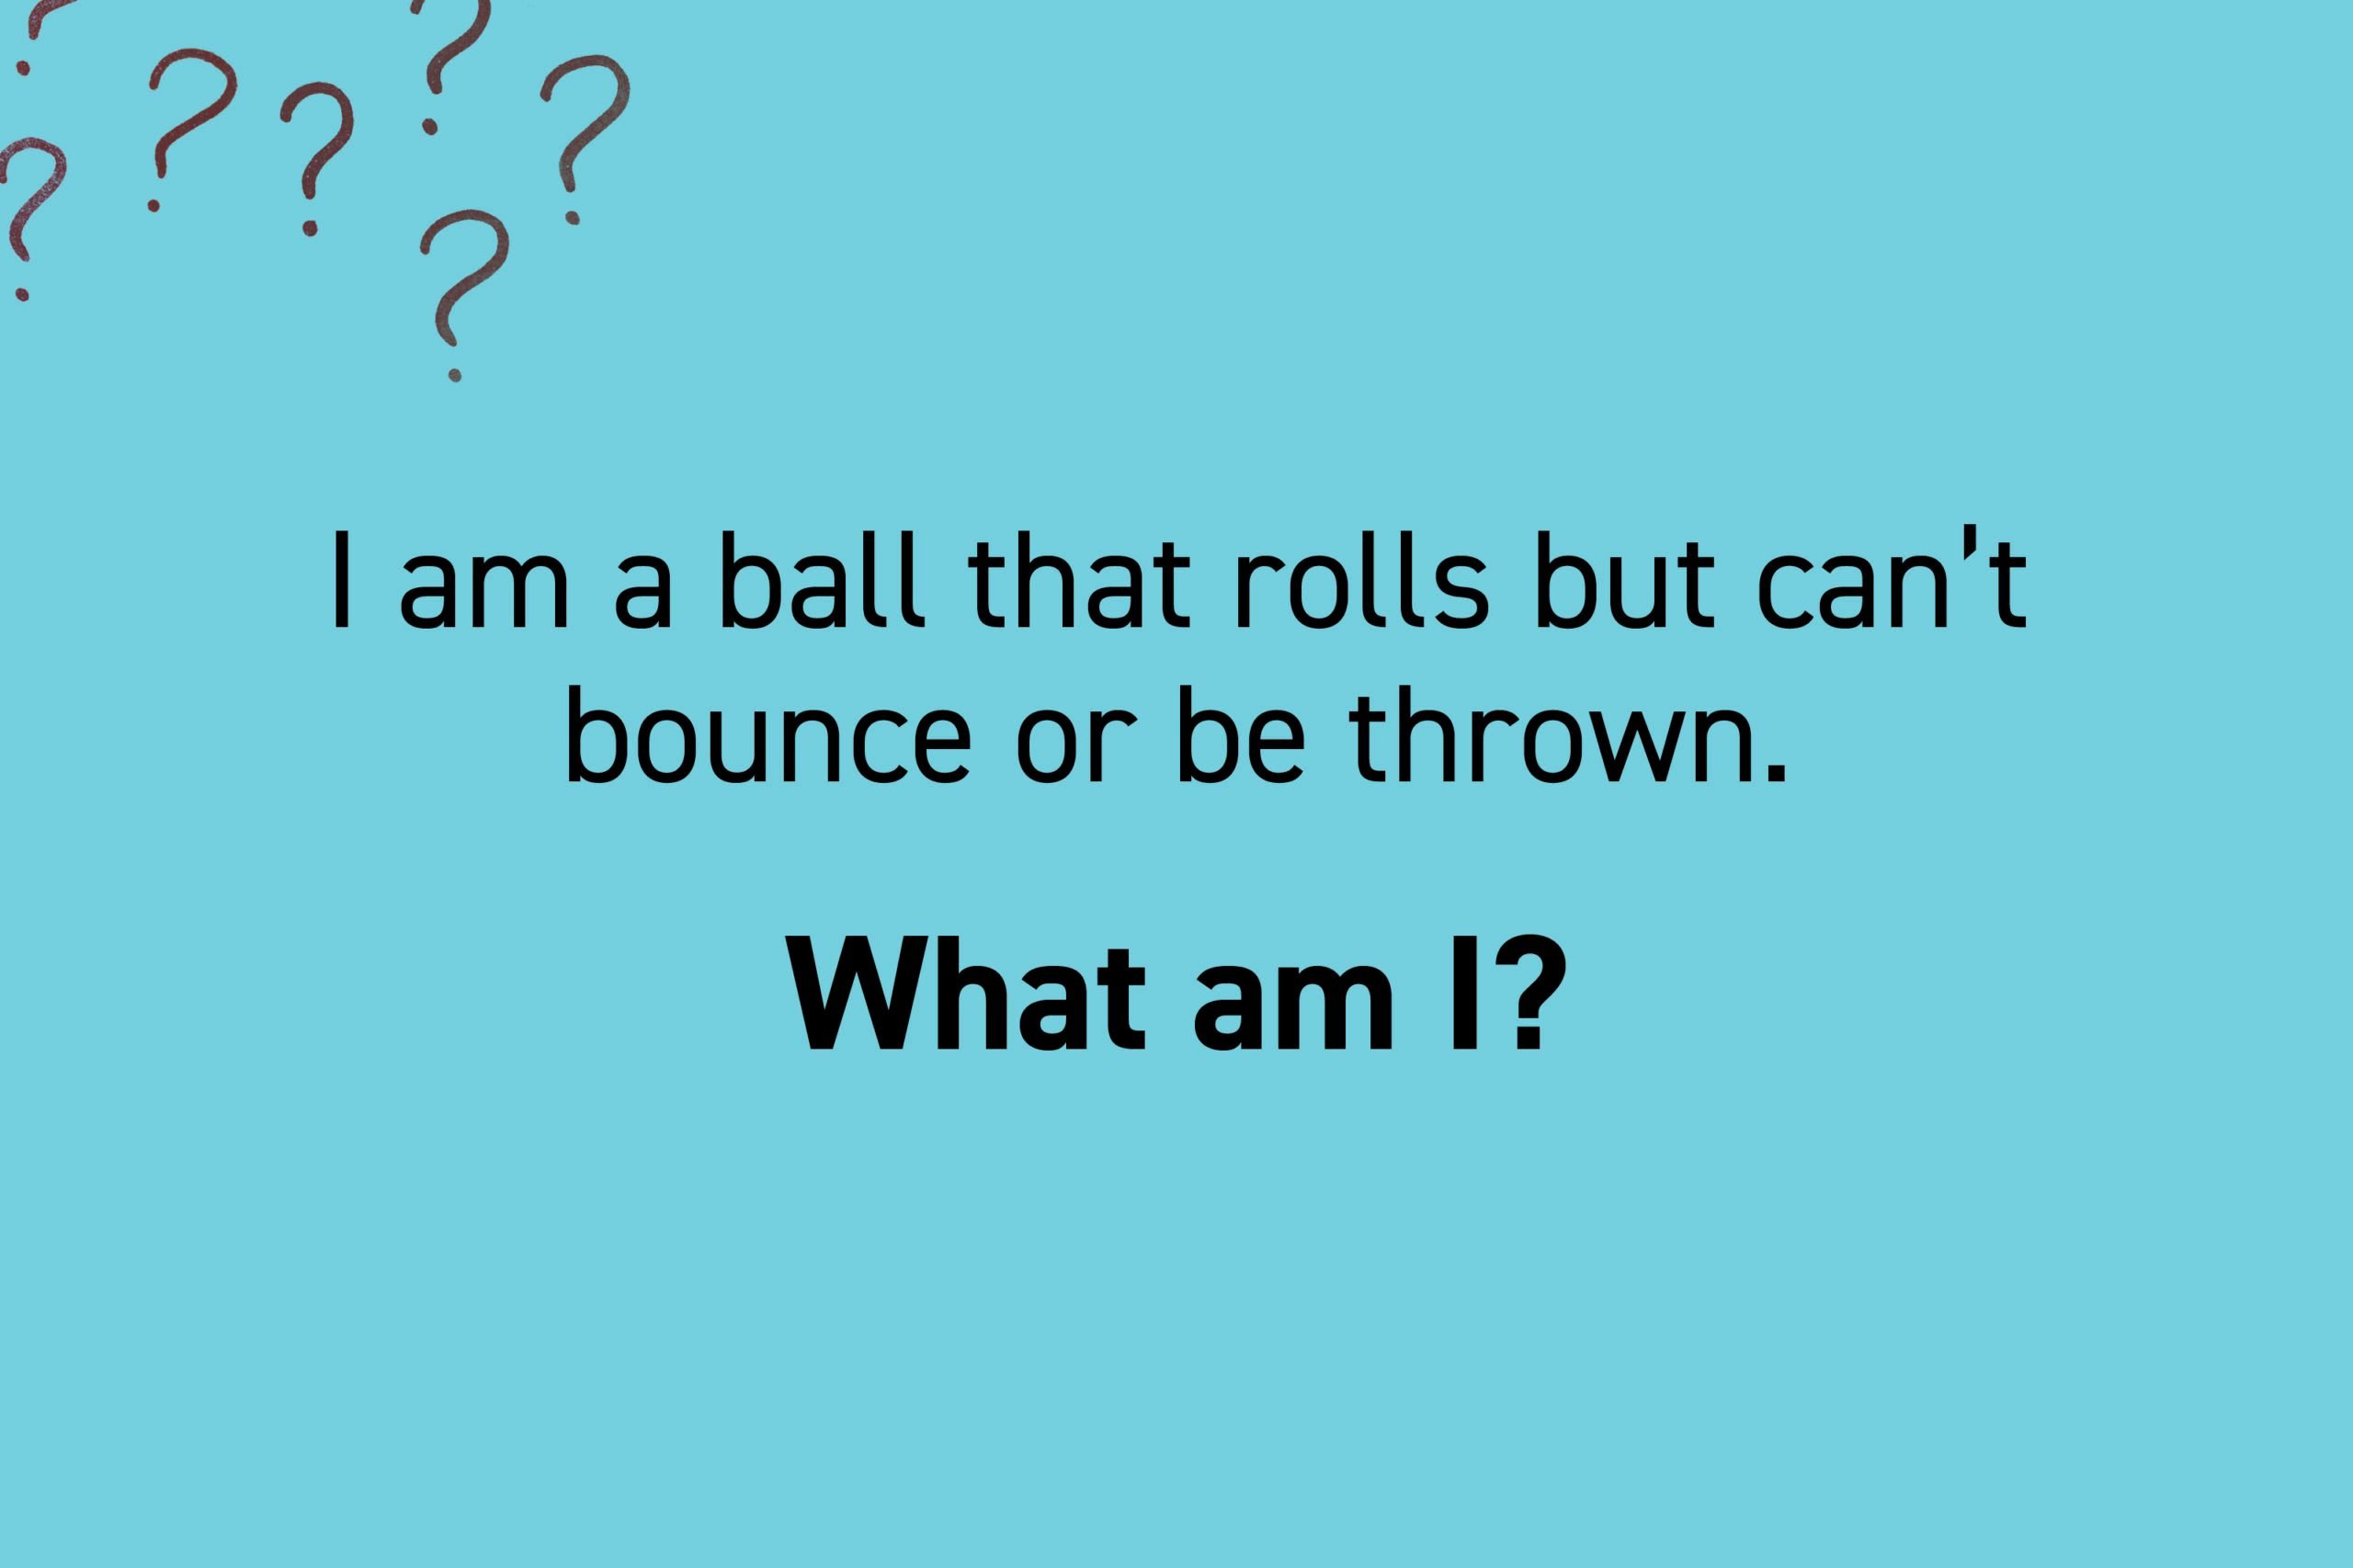 I am a ball that rolls but can't bounce or be thrown.